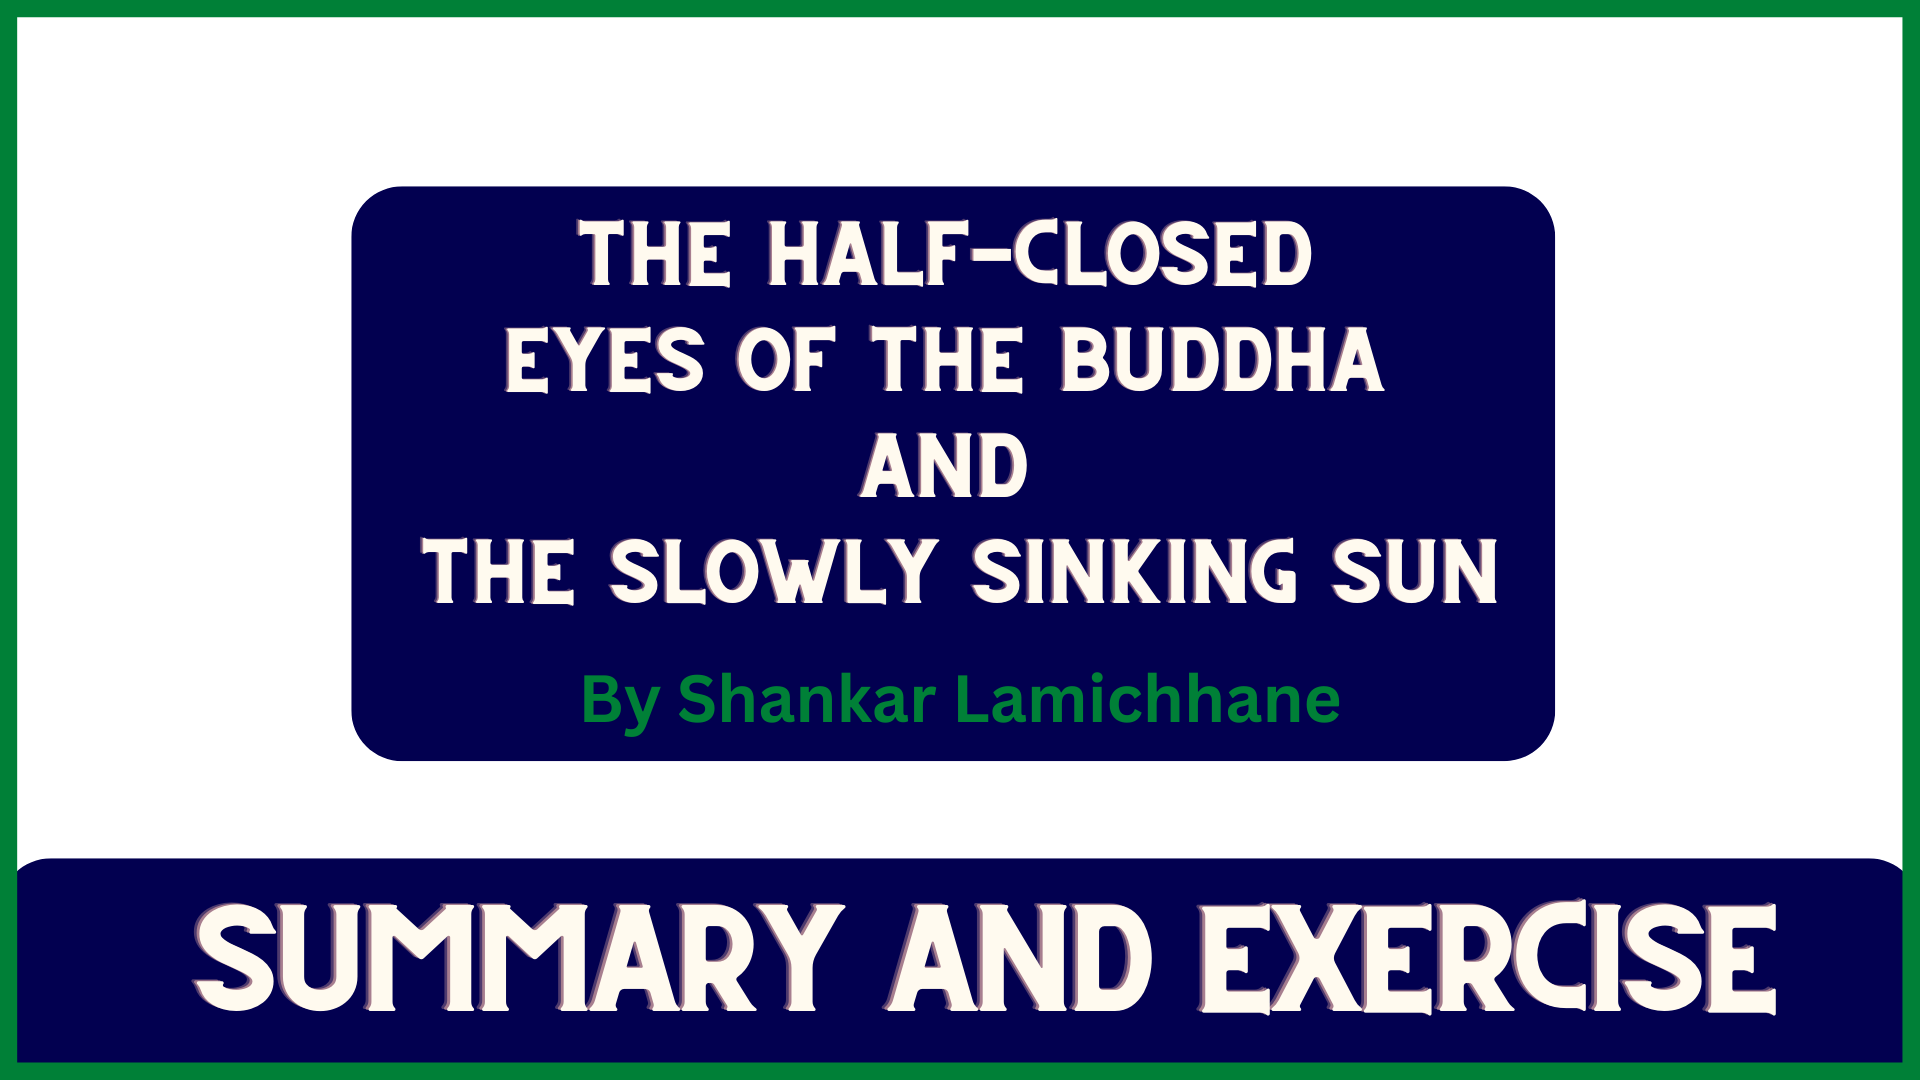 The Half-closed Eyes of the Buddha and the Slowly Sinking Sun